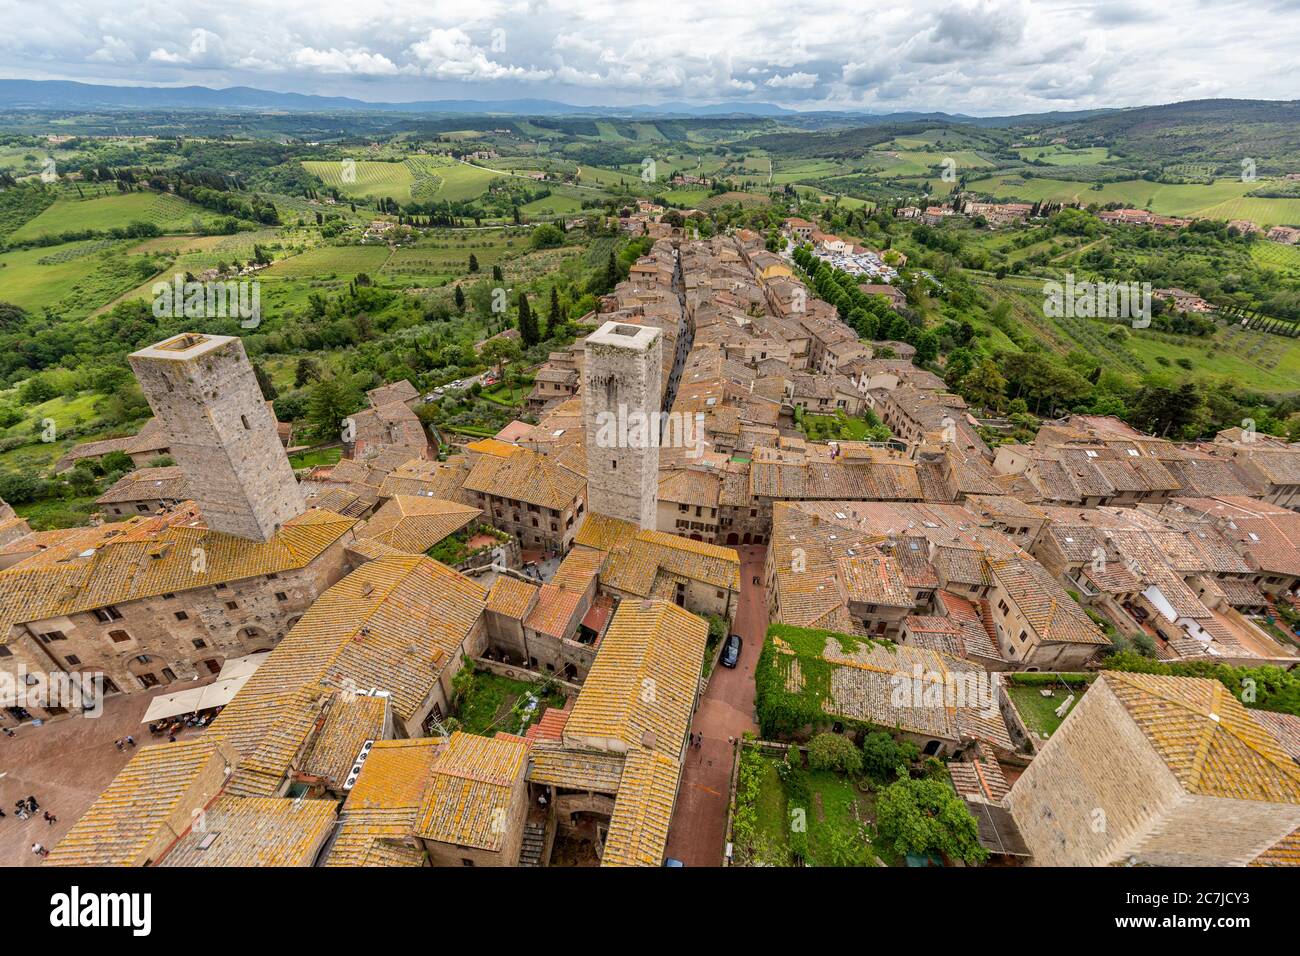 View of San Gimignano from the tallest tower, Torre Grossa. San Gimignano is a small Italian town in Tuscany with a medieval town center. San Gimignano is also called 'Medieval Manhattan' or the 'City of Towers'. Stock Photo